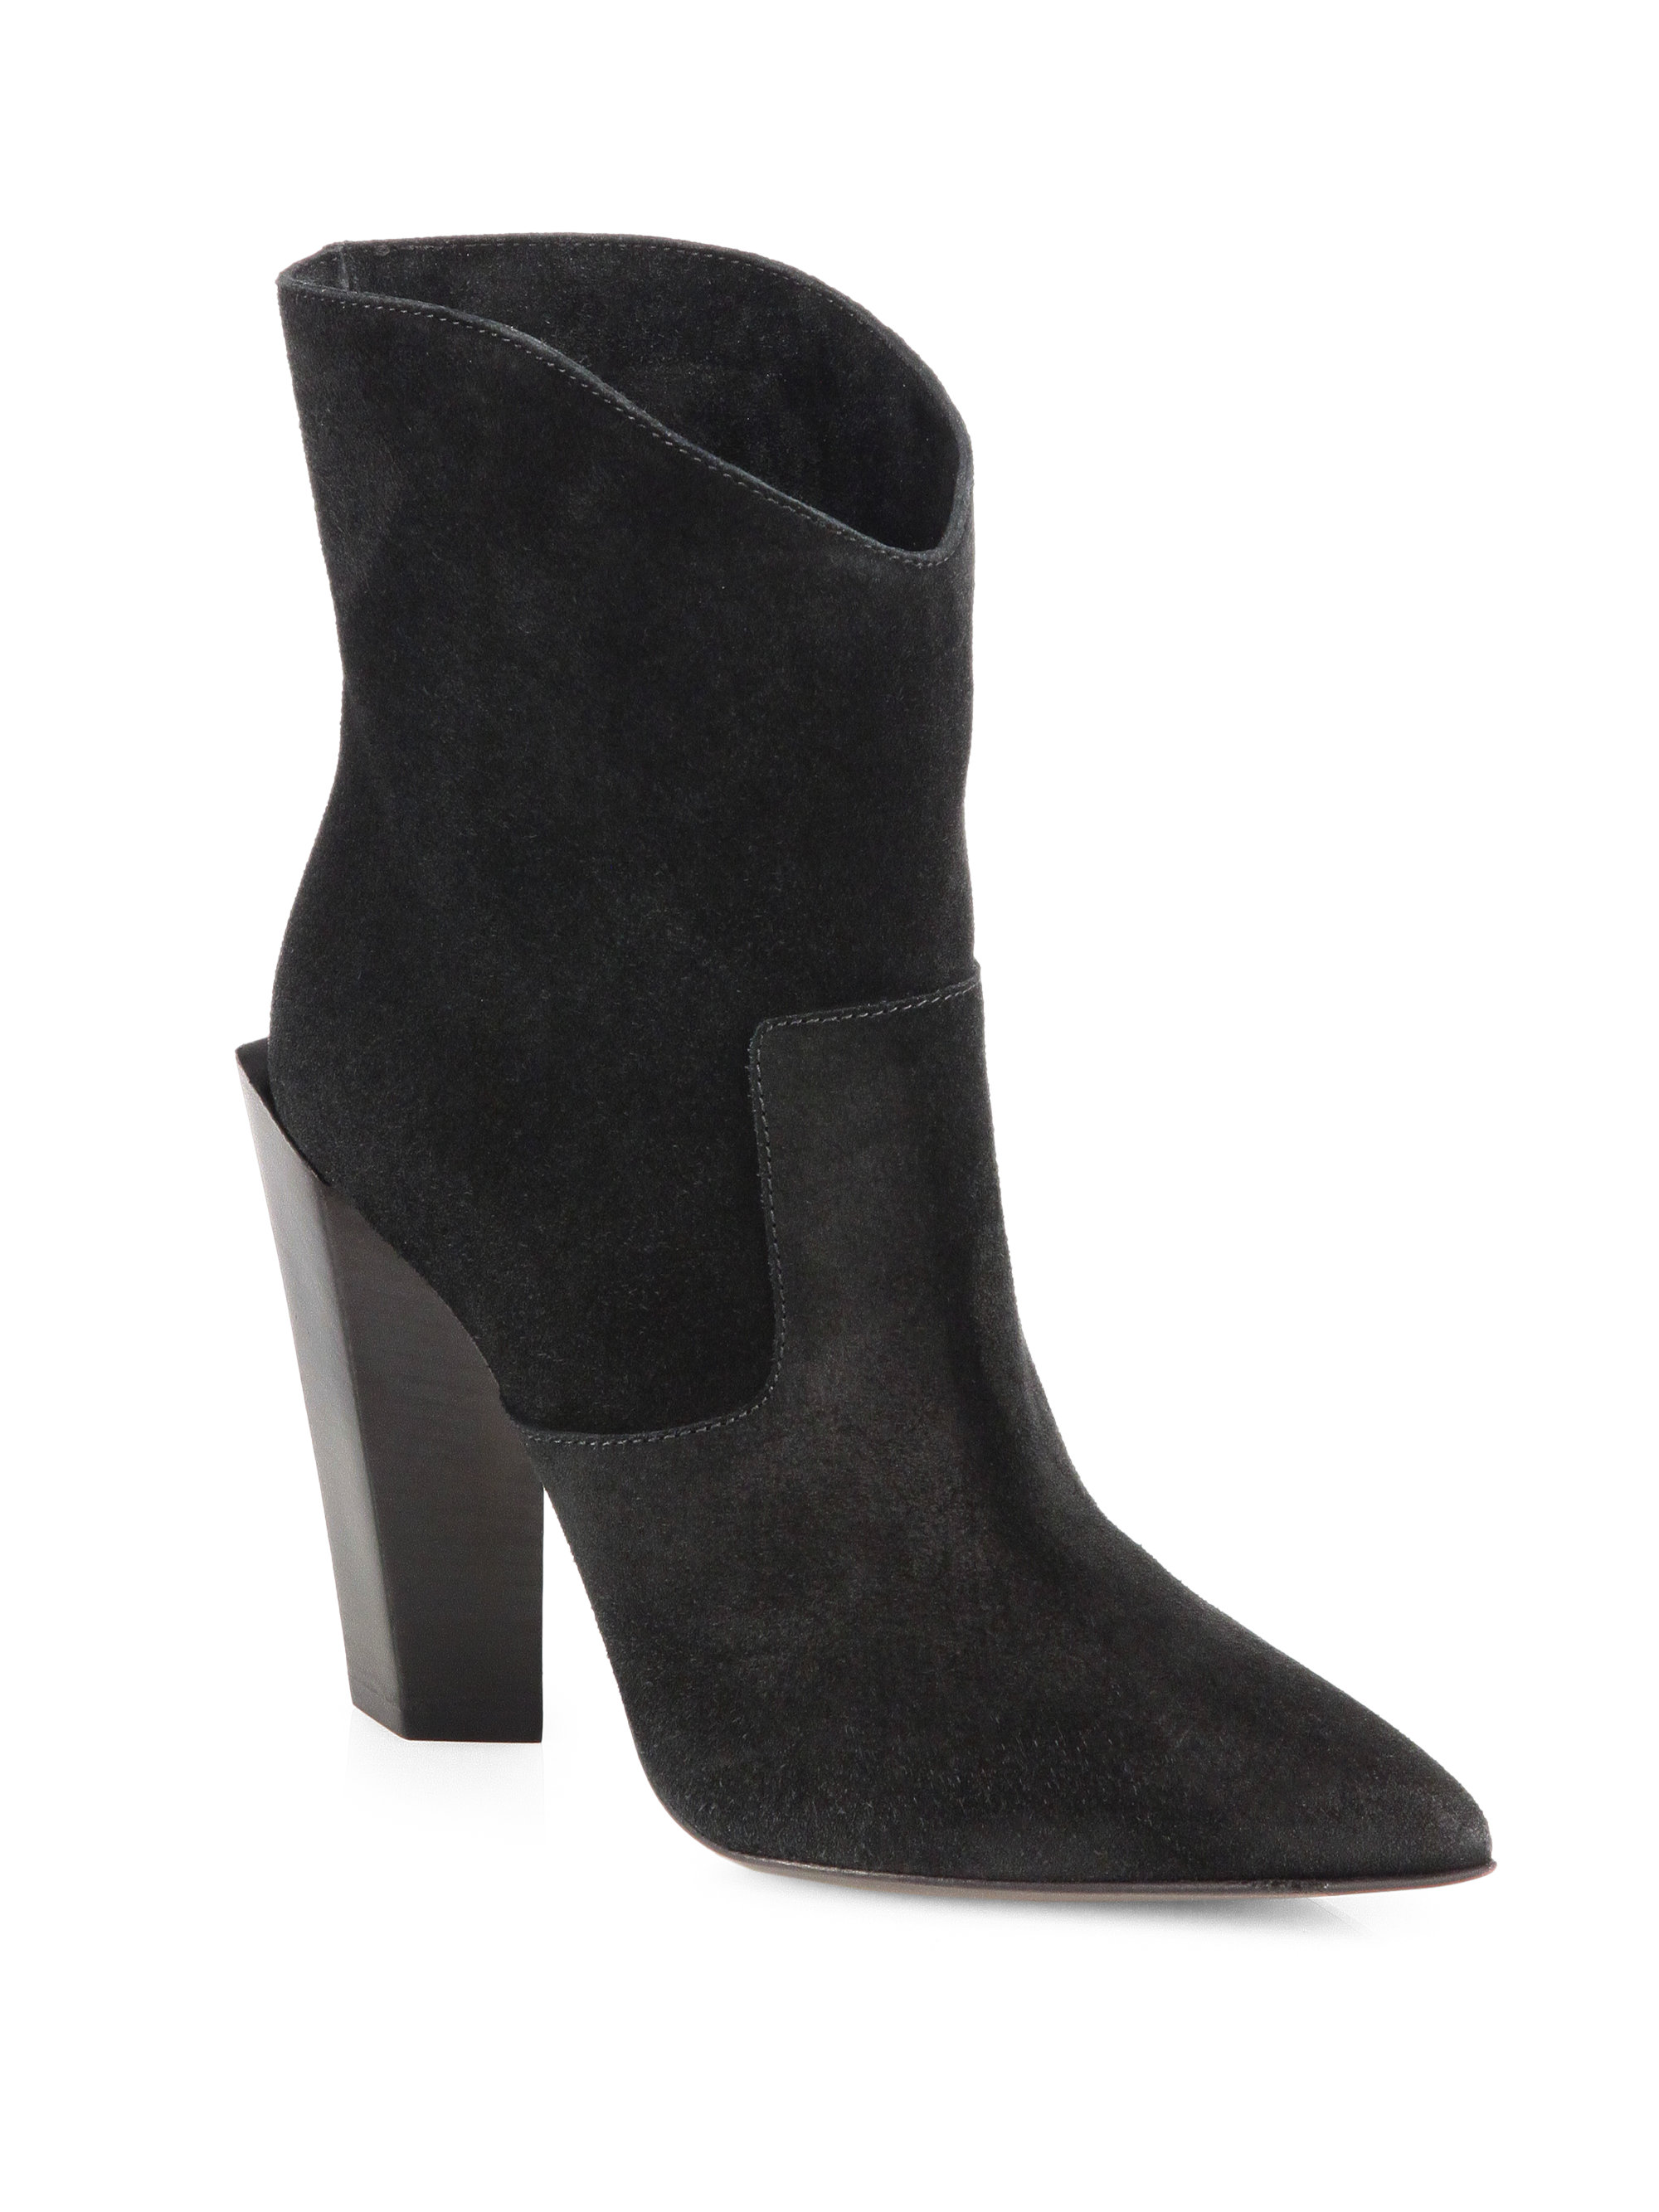 Fendi Suede Western Ankle Boots in Black | Lyst